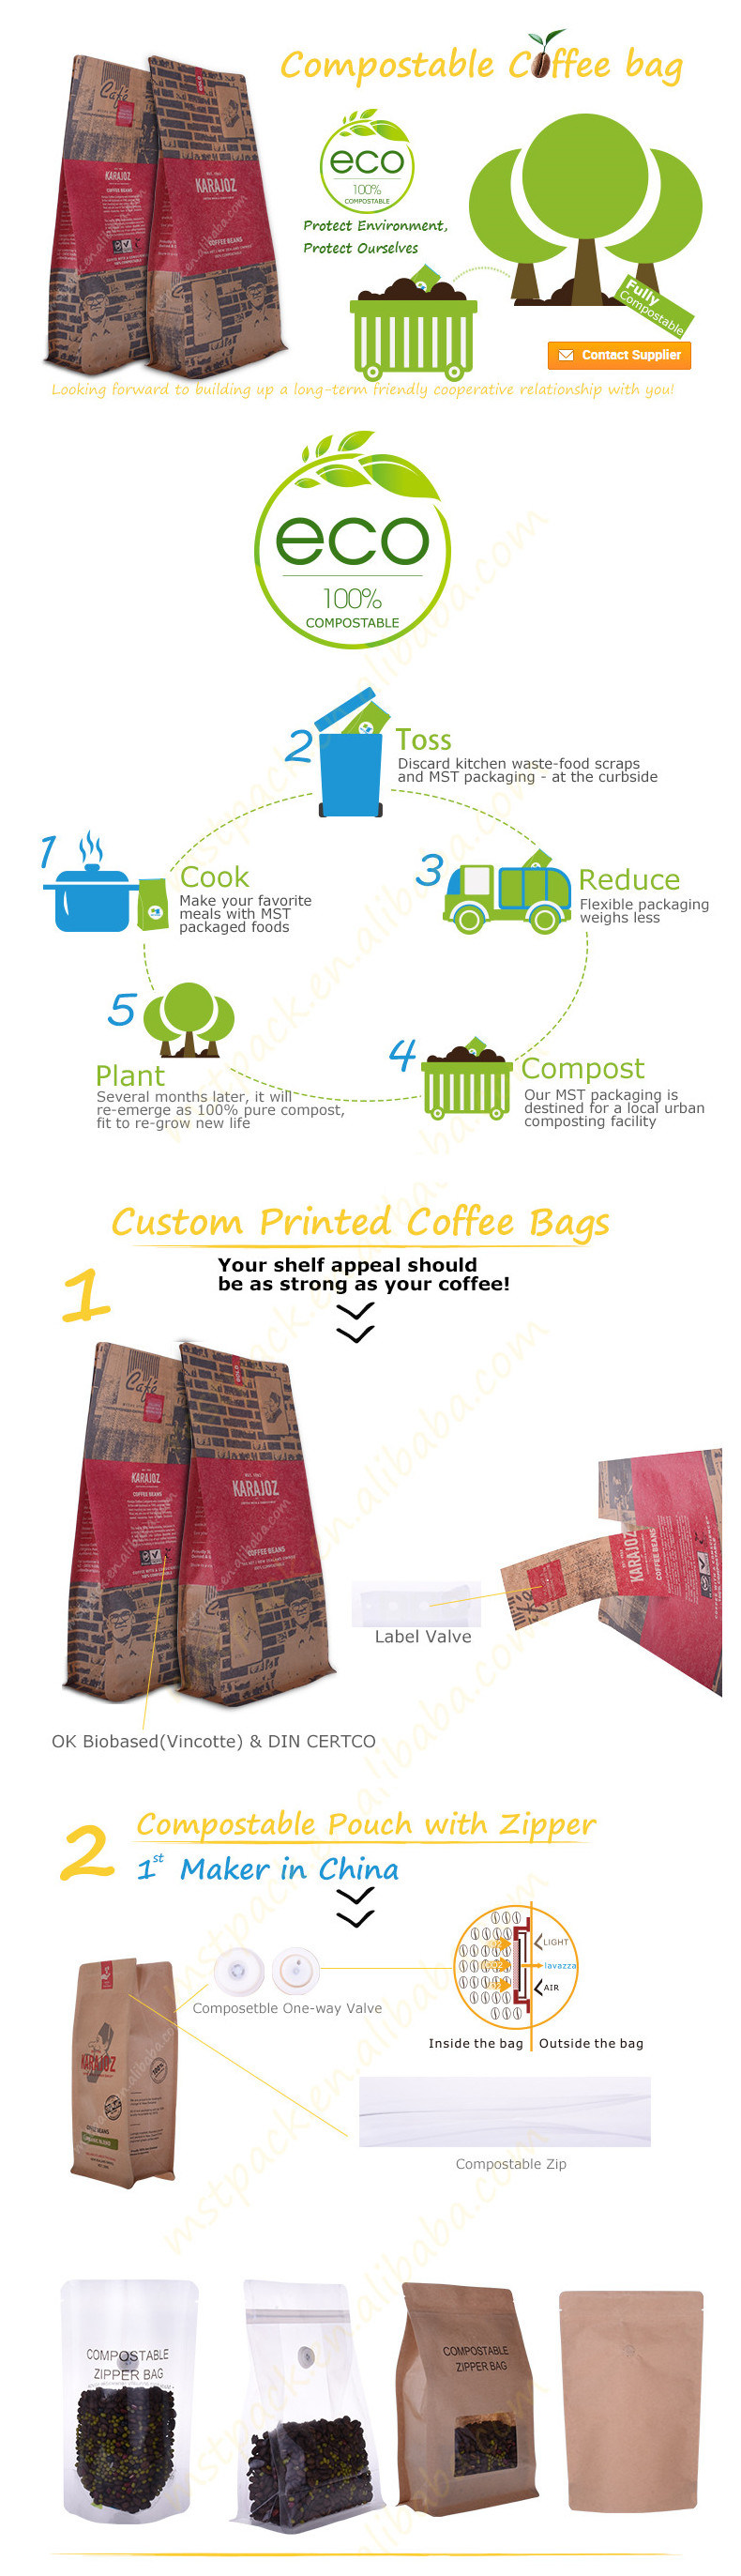 Biodegradable Recyclable Flat Bottom Foil Heat Seal One Way Valve Packaging Foil Bag for Packing Coffee